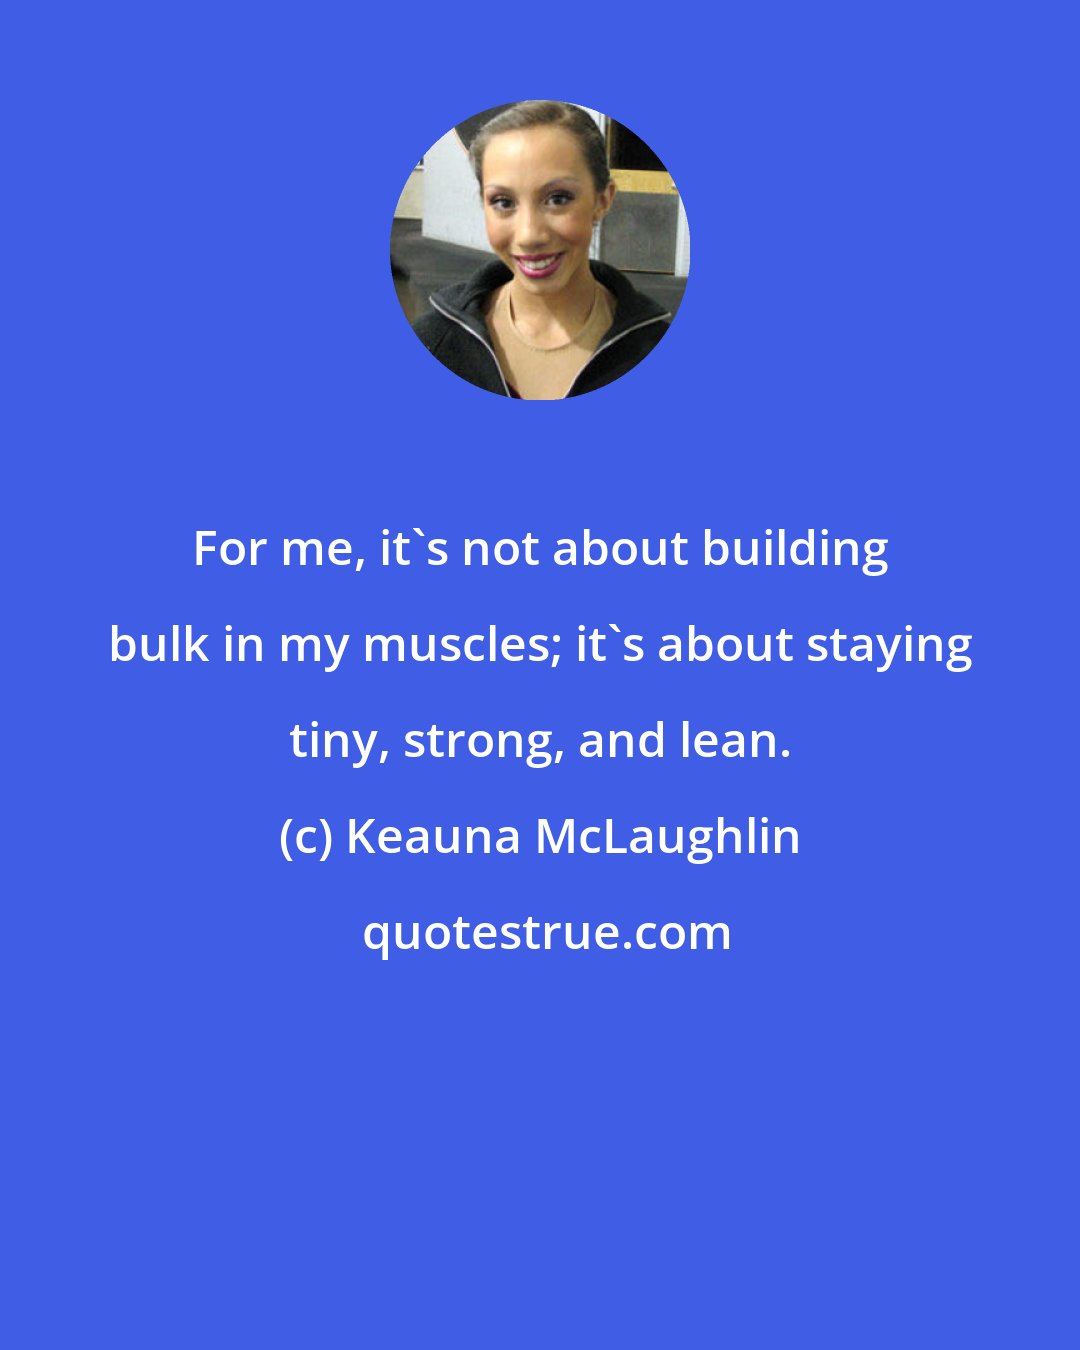 Keauna McLaughlin: For me, it's not about building bulk in my muscles; it's about staying tiny, strong, and lean.